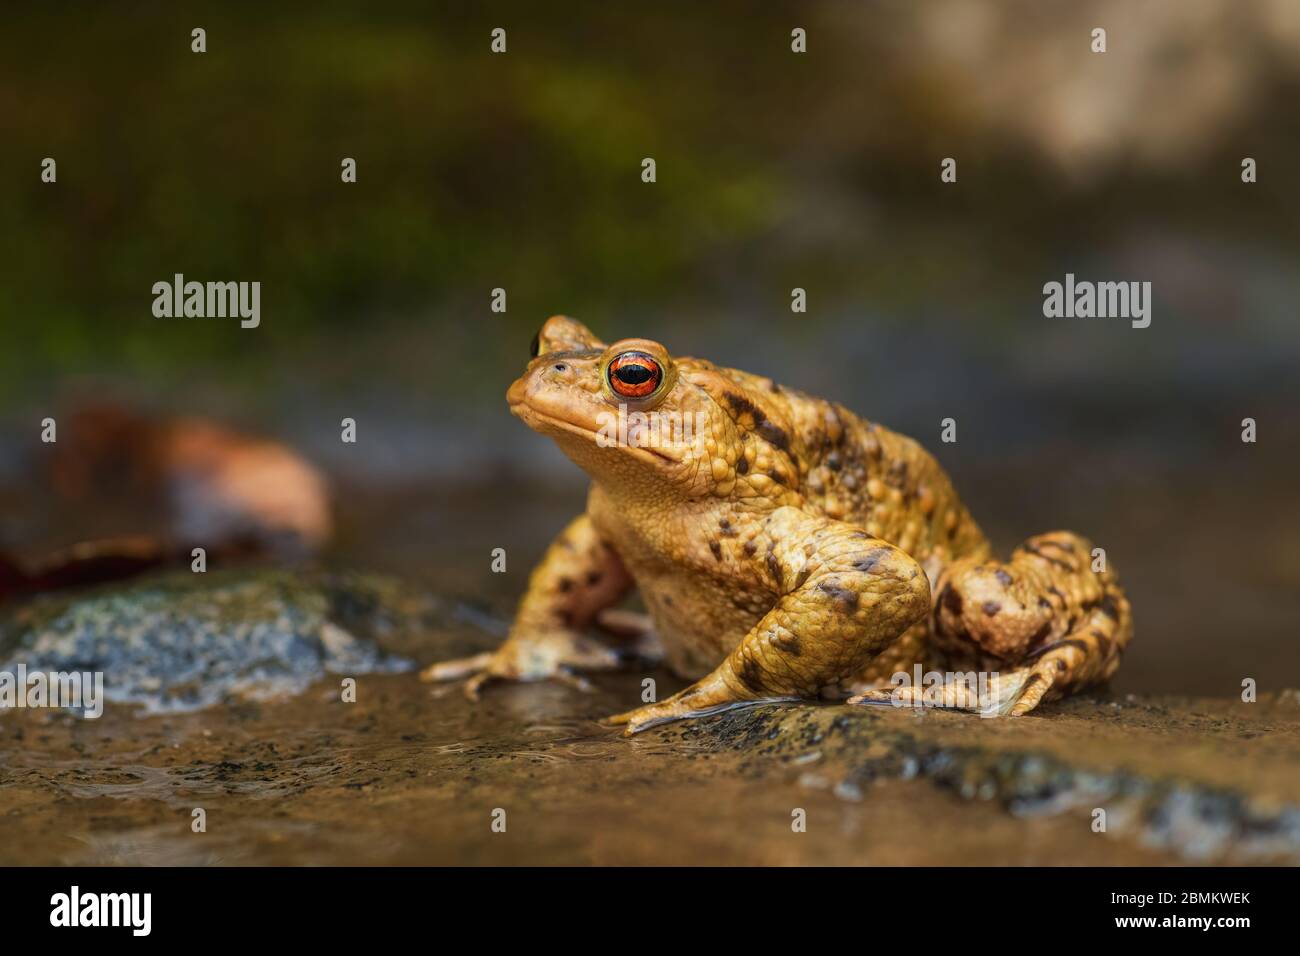 Common European Toad - Bufo bufo, large frog from European rivers and lakes, Zlin, Czech Republic. Stock Photo